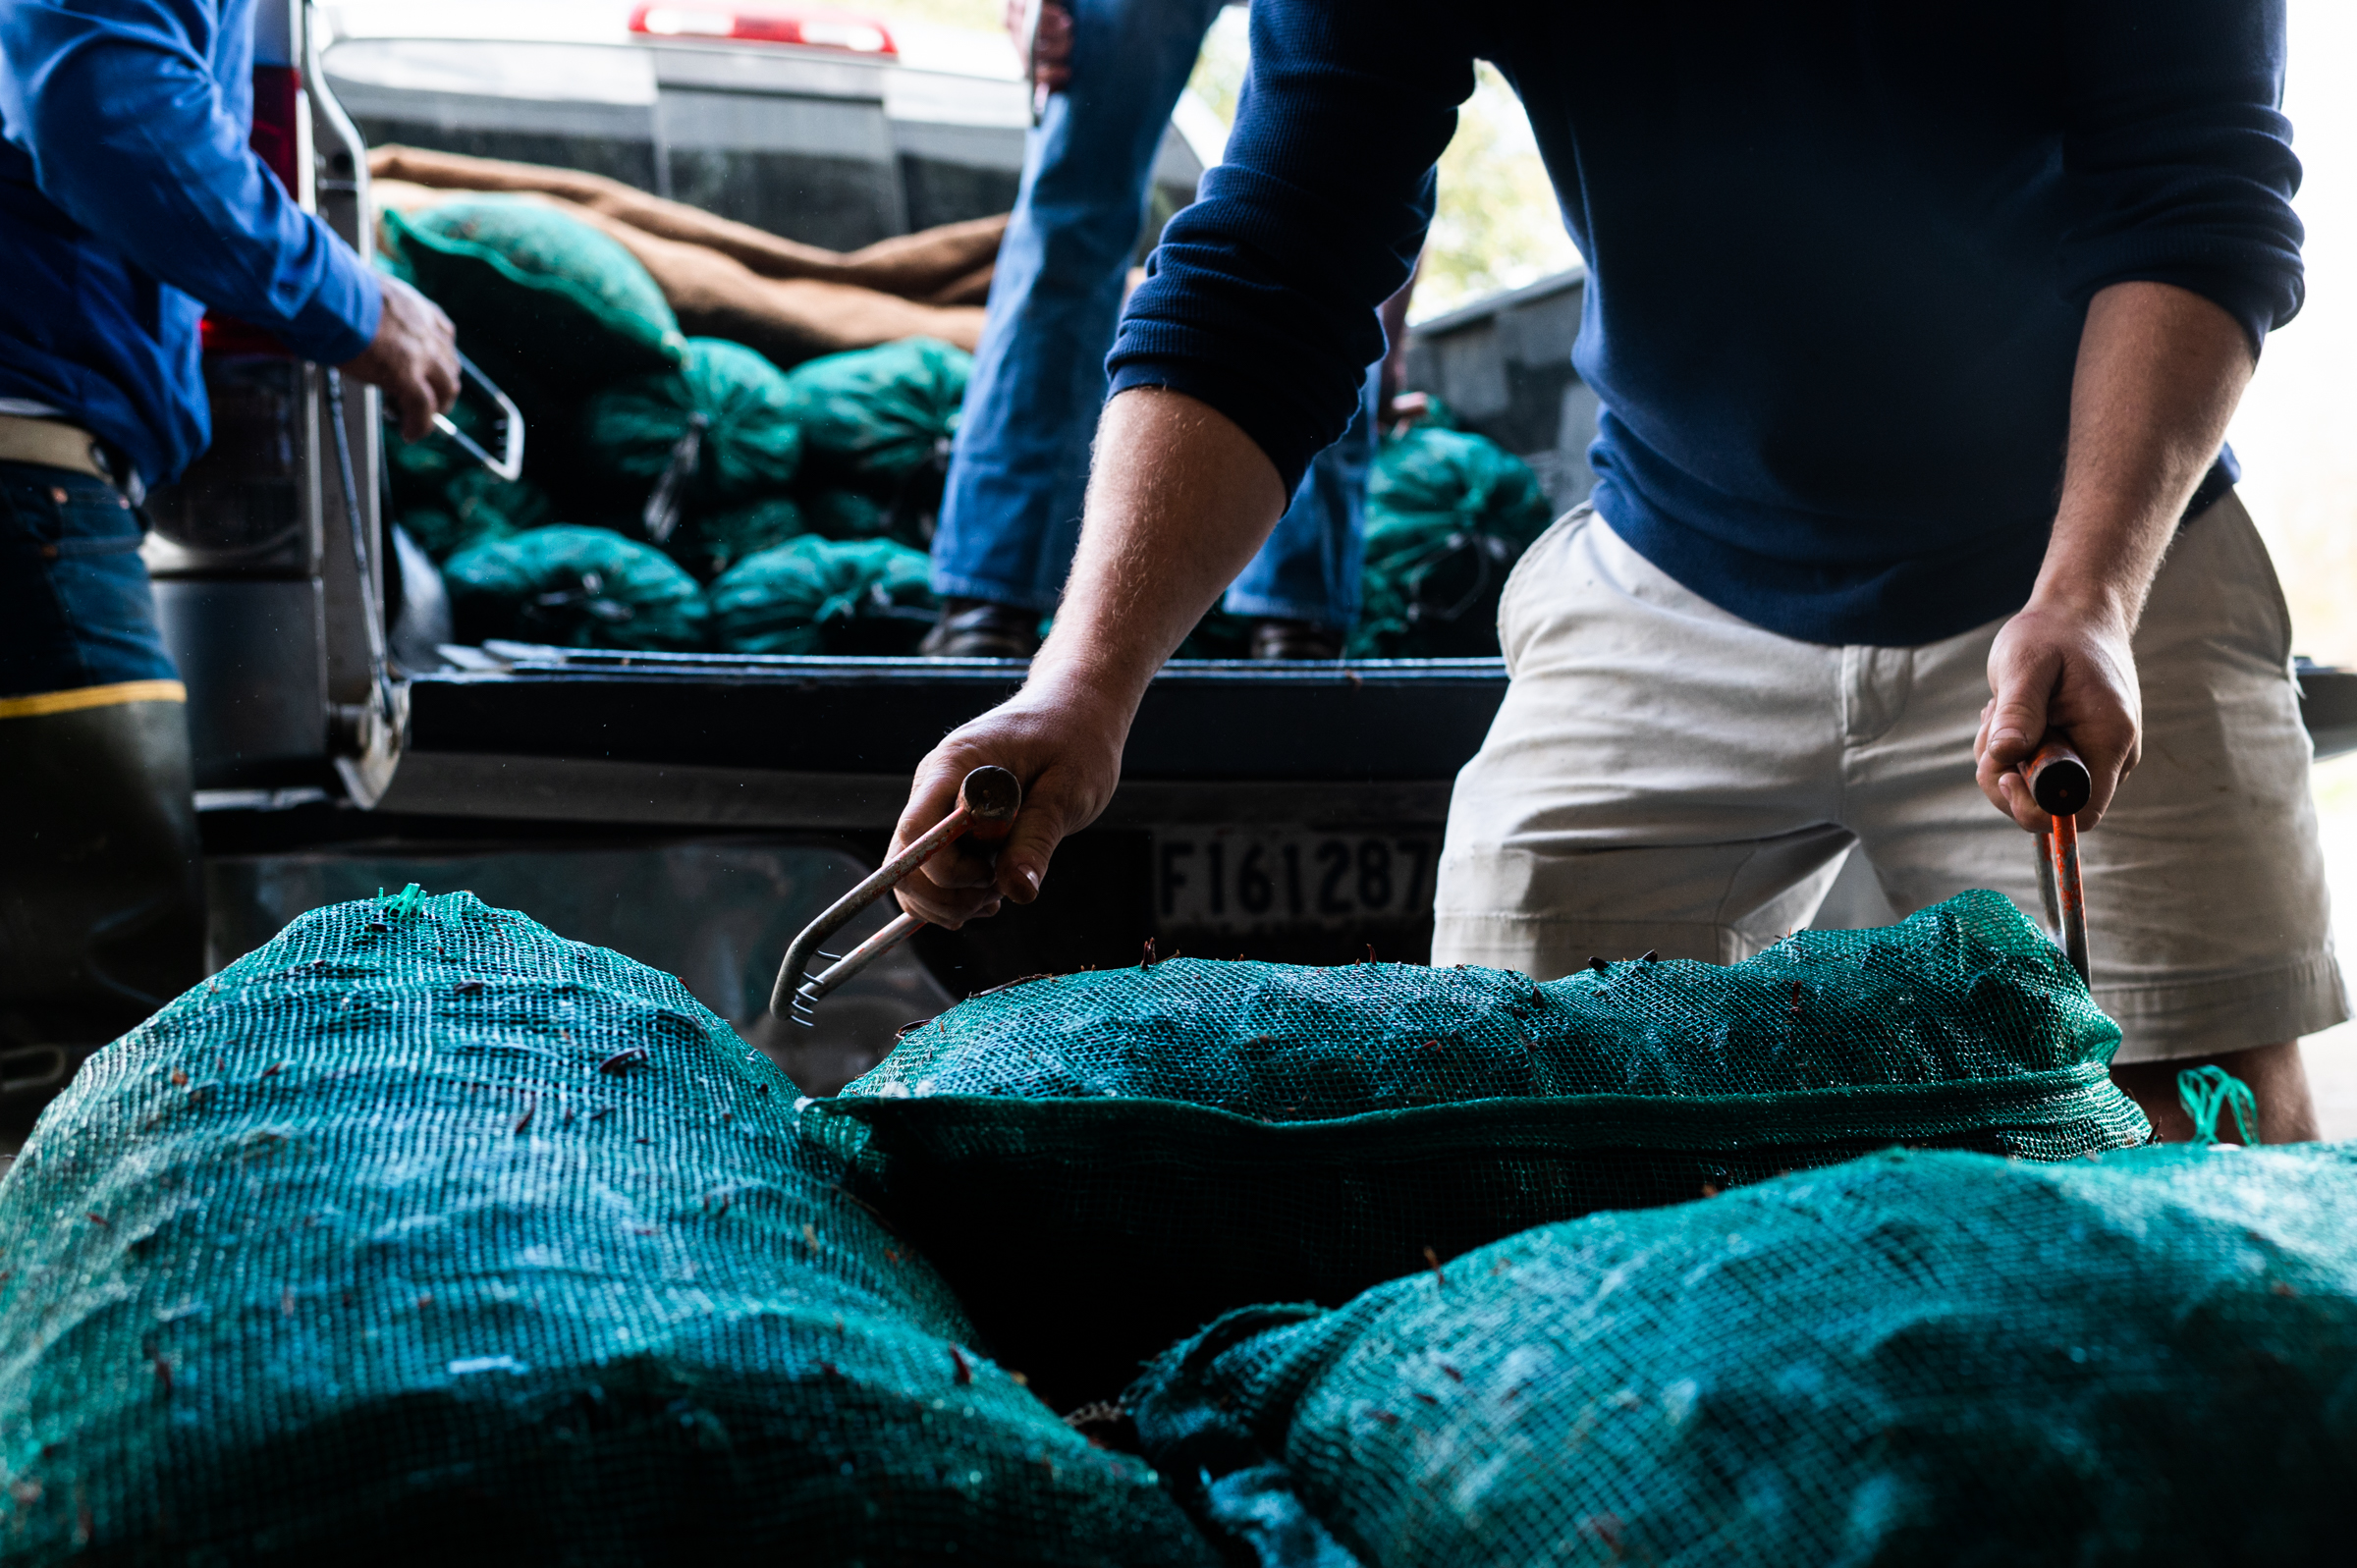 Sacks of fresh crawfish are unloaded from a truck for weighing